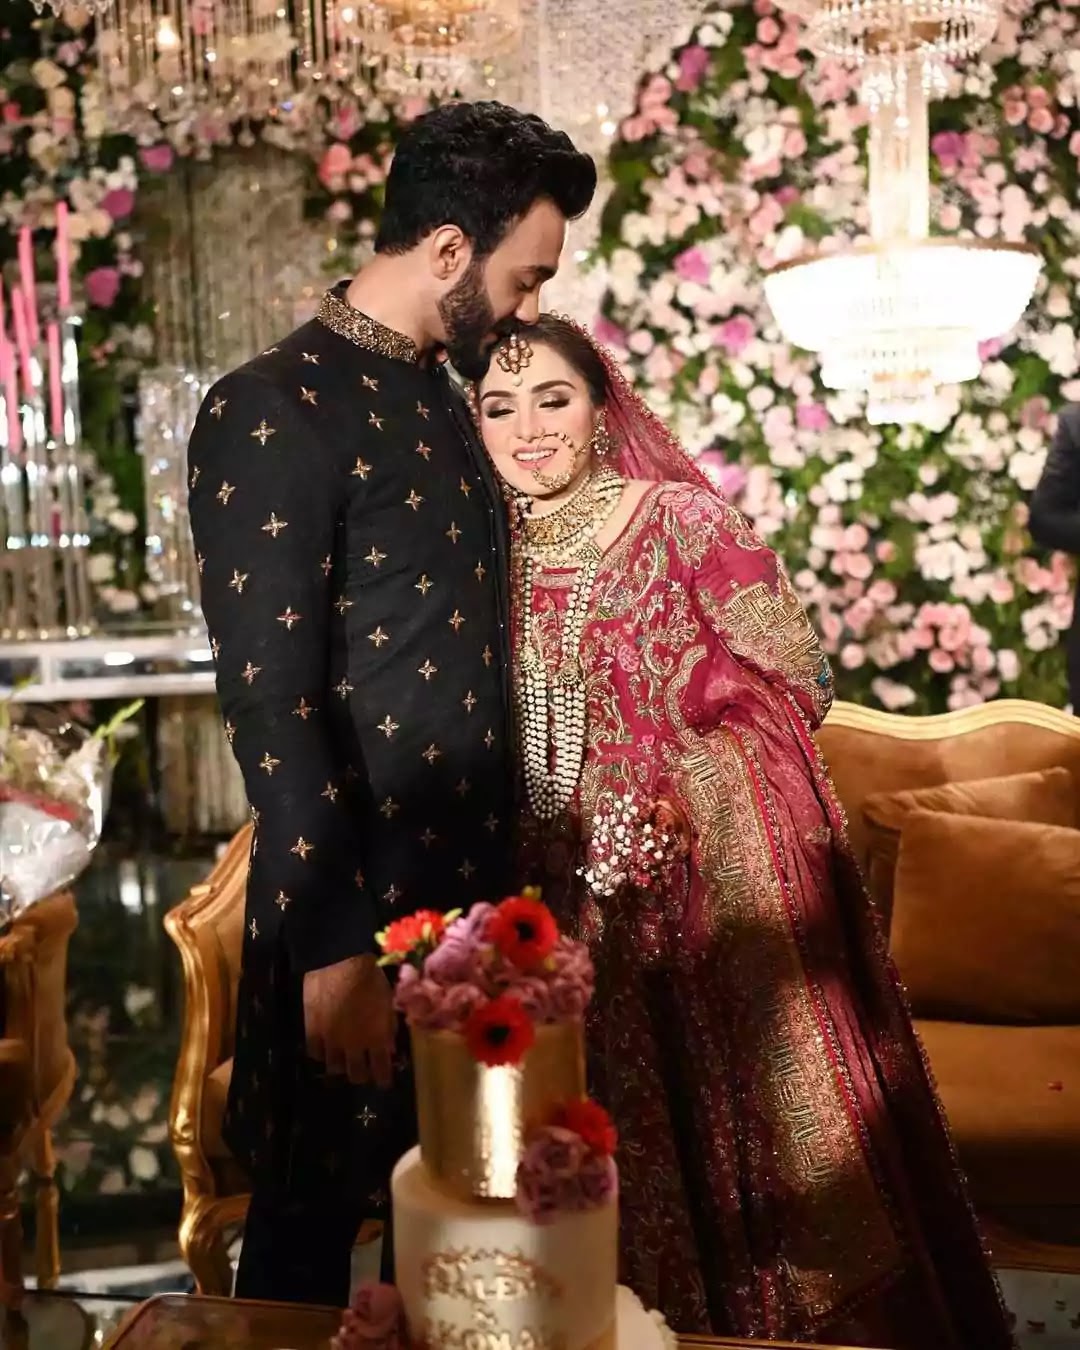 Komal Baig Wedding Pictures With Her Husband